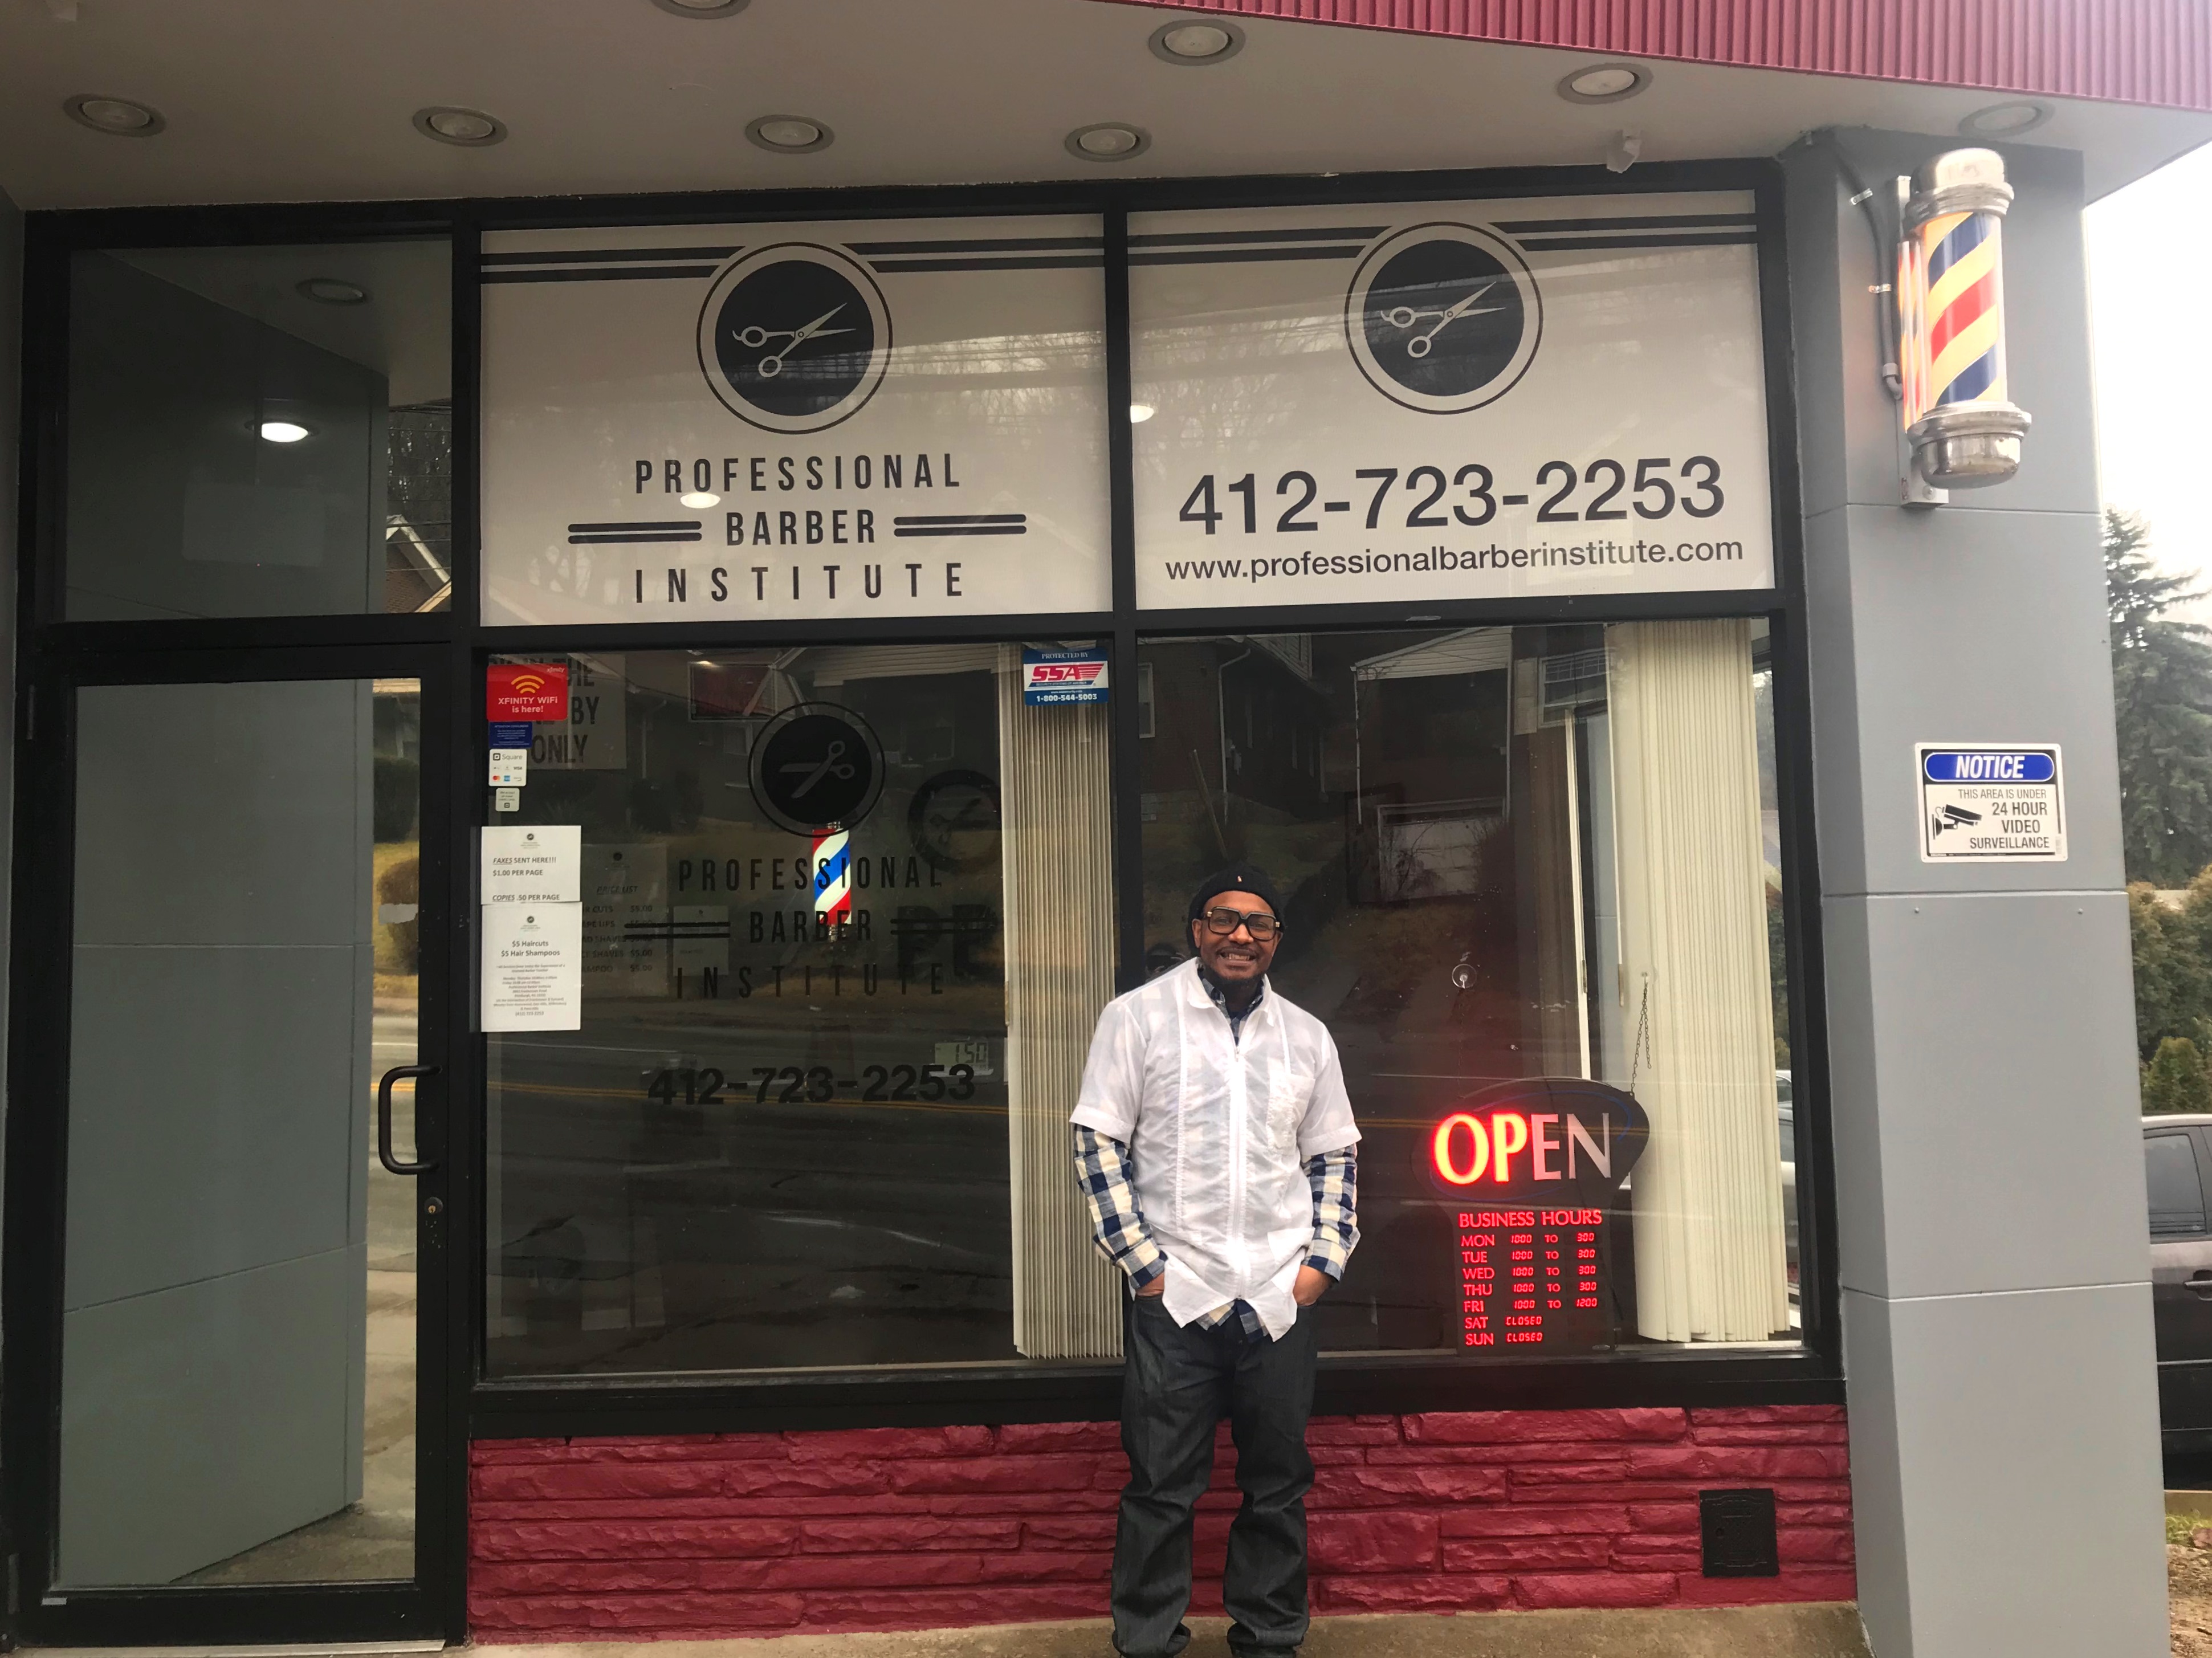 Wahad Ansari, owner of Professional Barber Institute, stands in front of his storefront.